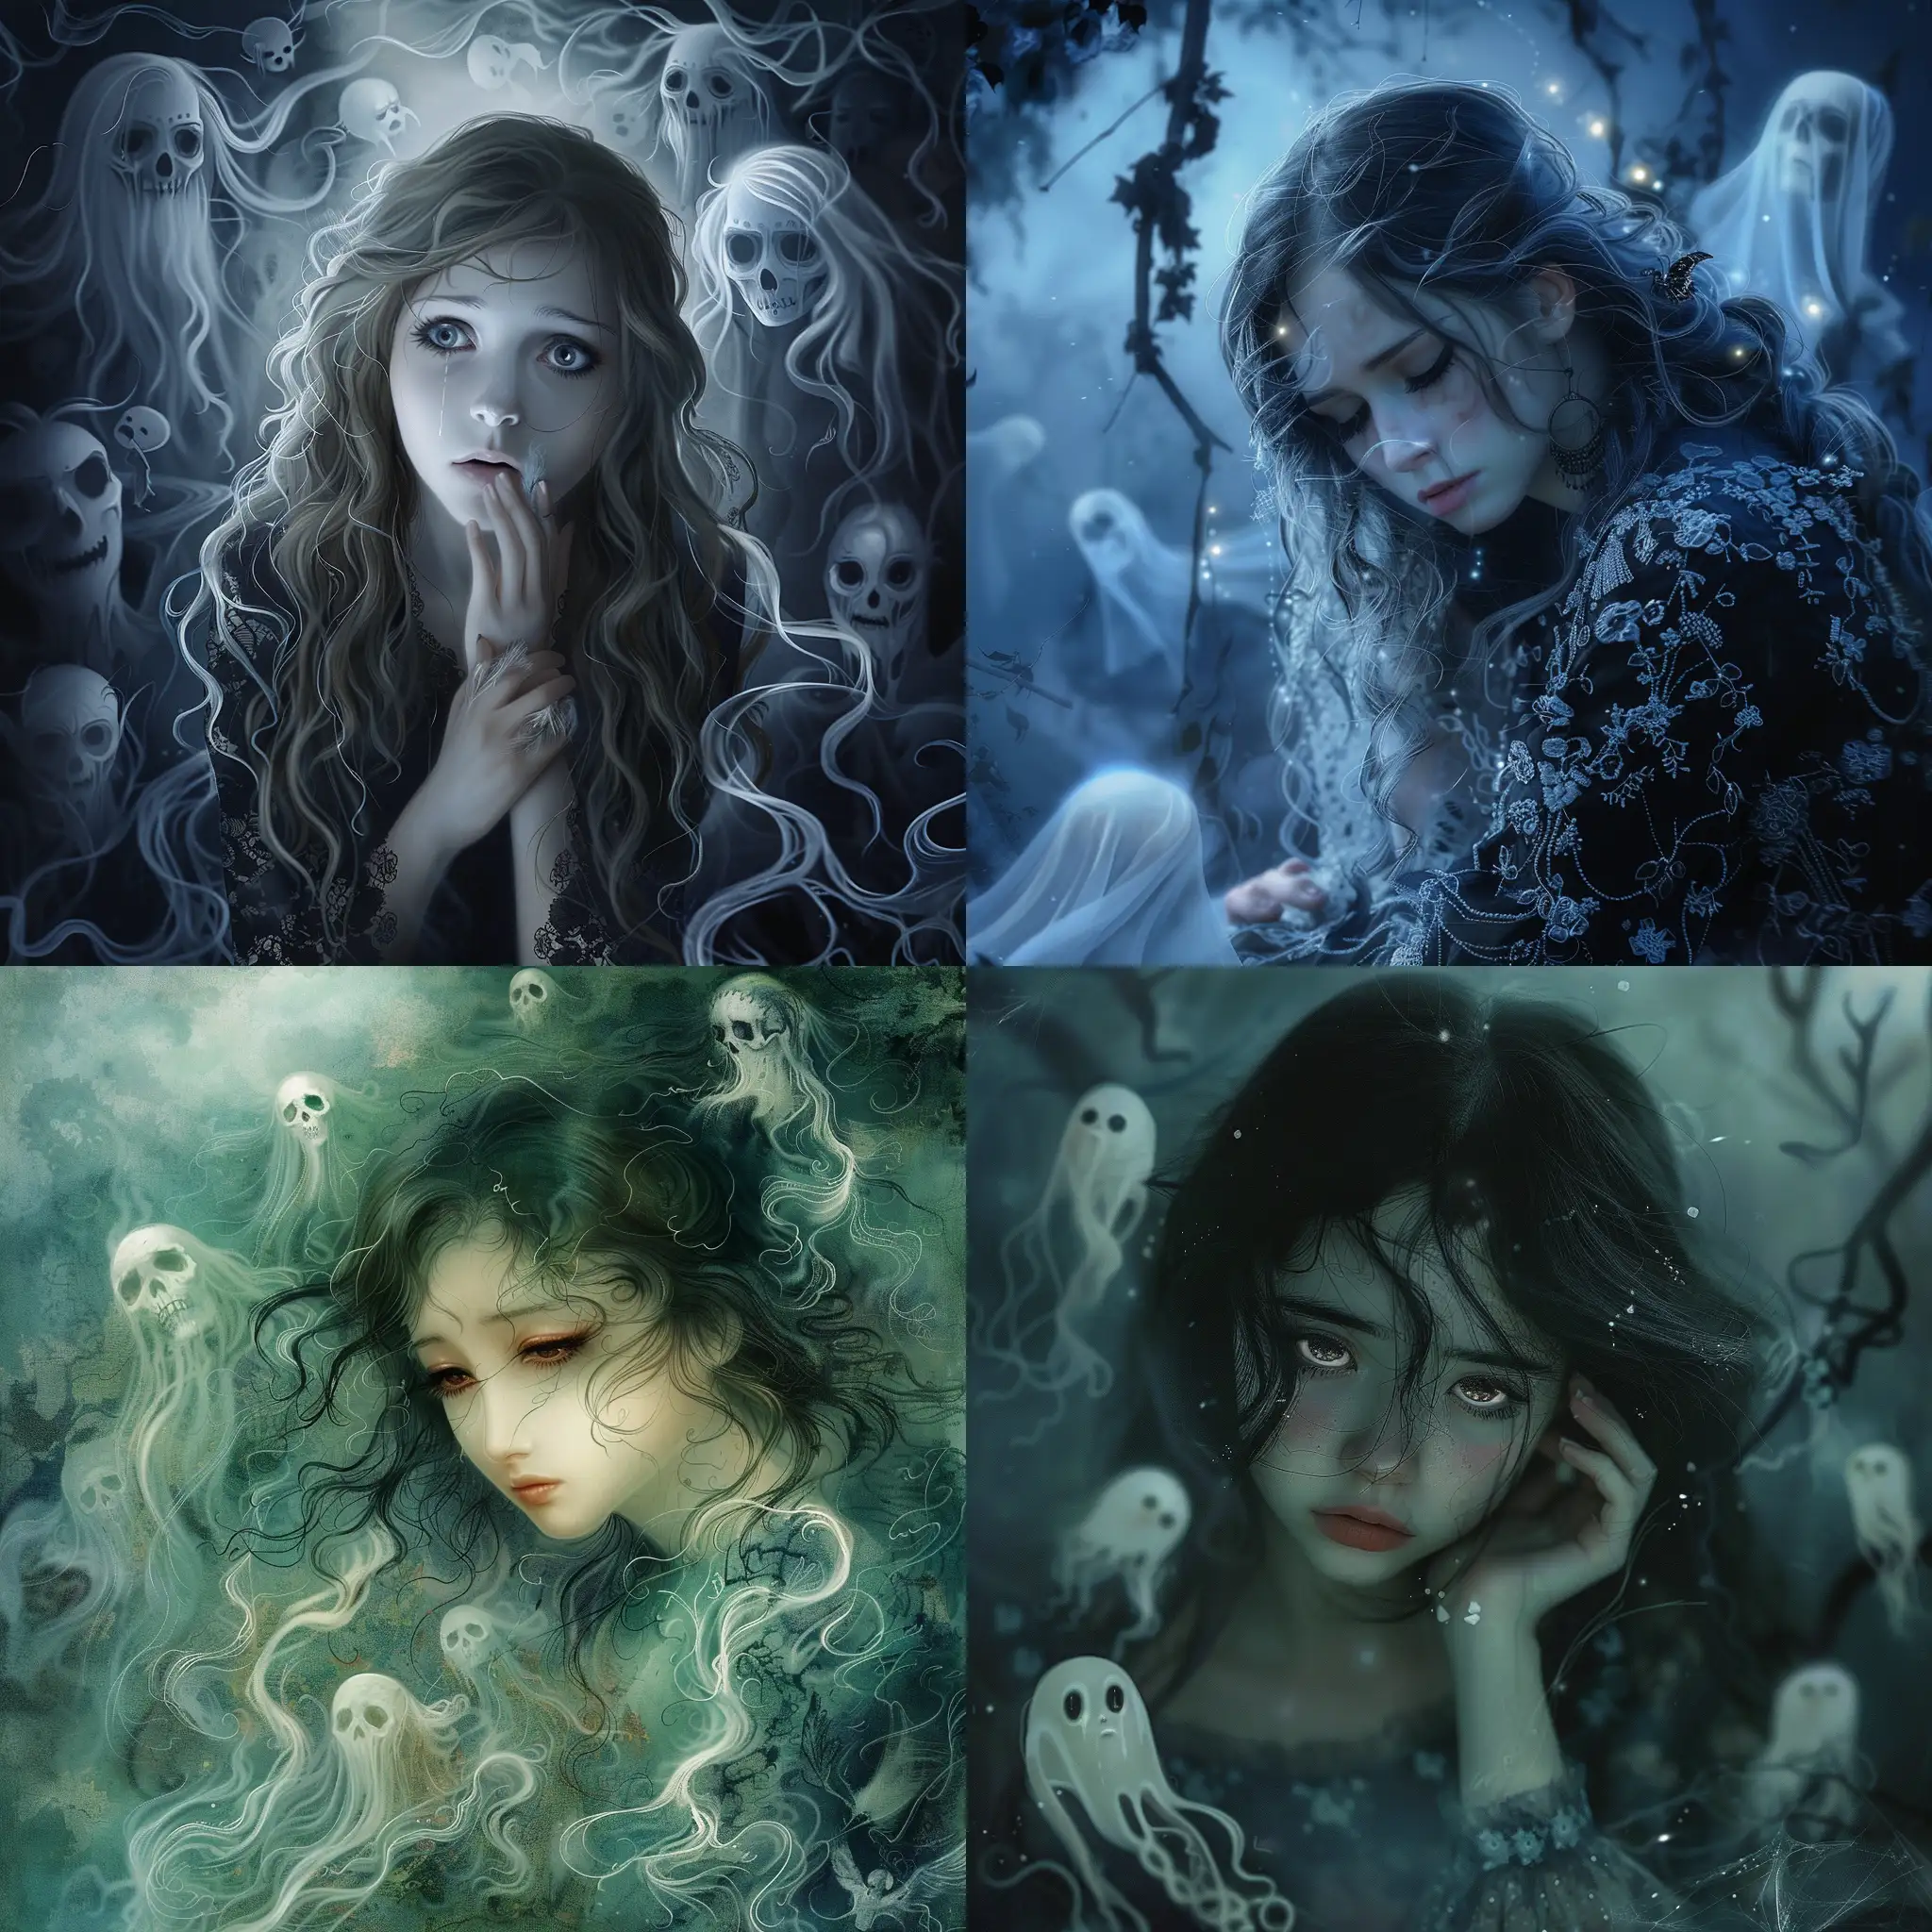 Sad-Beautiful-Woman-Surrounded-by-Ghosts-in-a-Magical-Fantasy-Scene